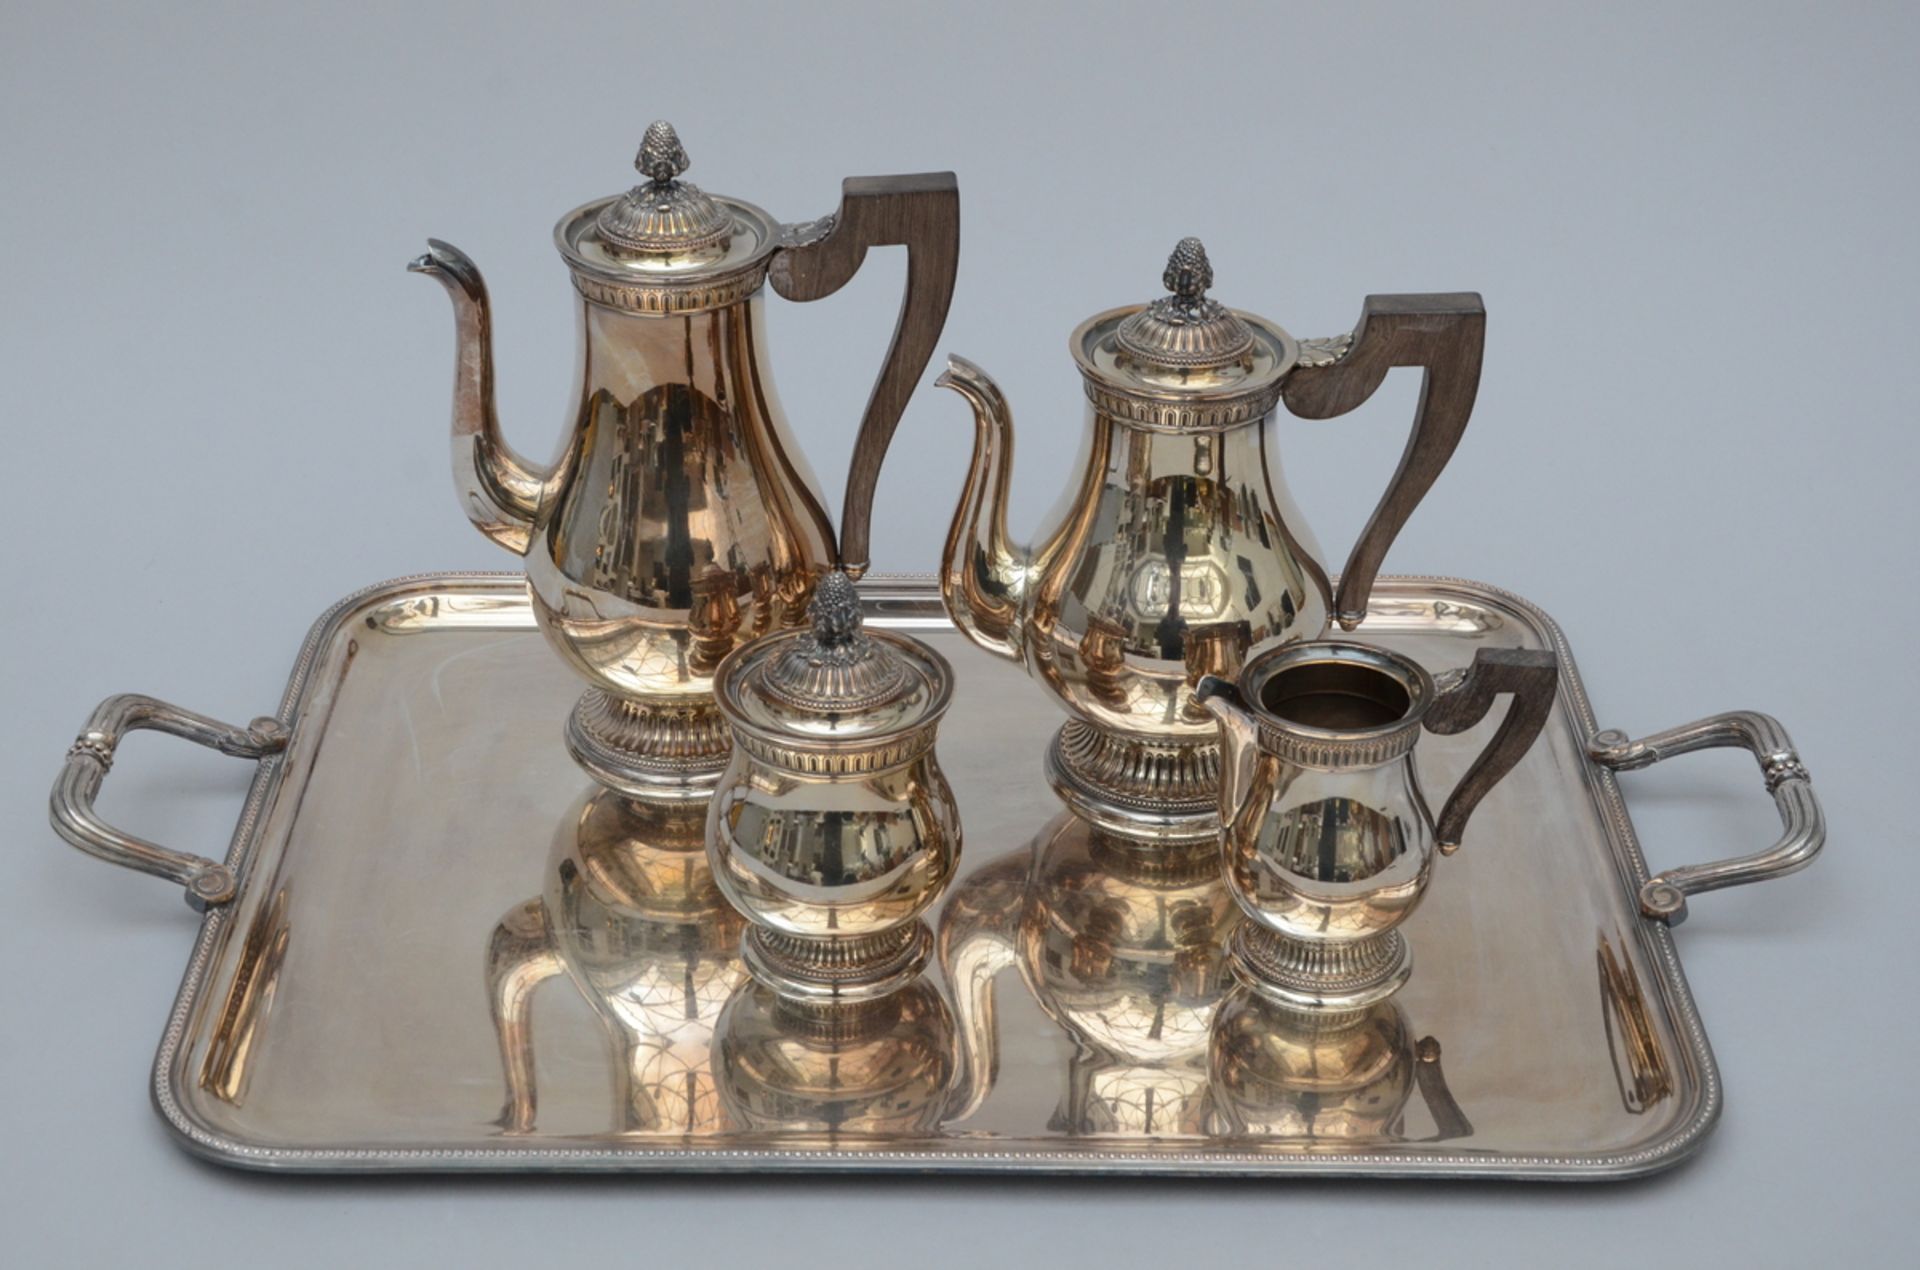 Christofle: silver plated coffee service on a scale (h27cm) (66x42cm)